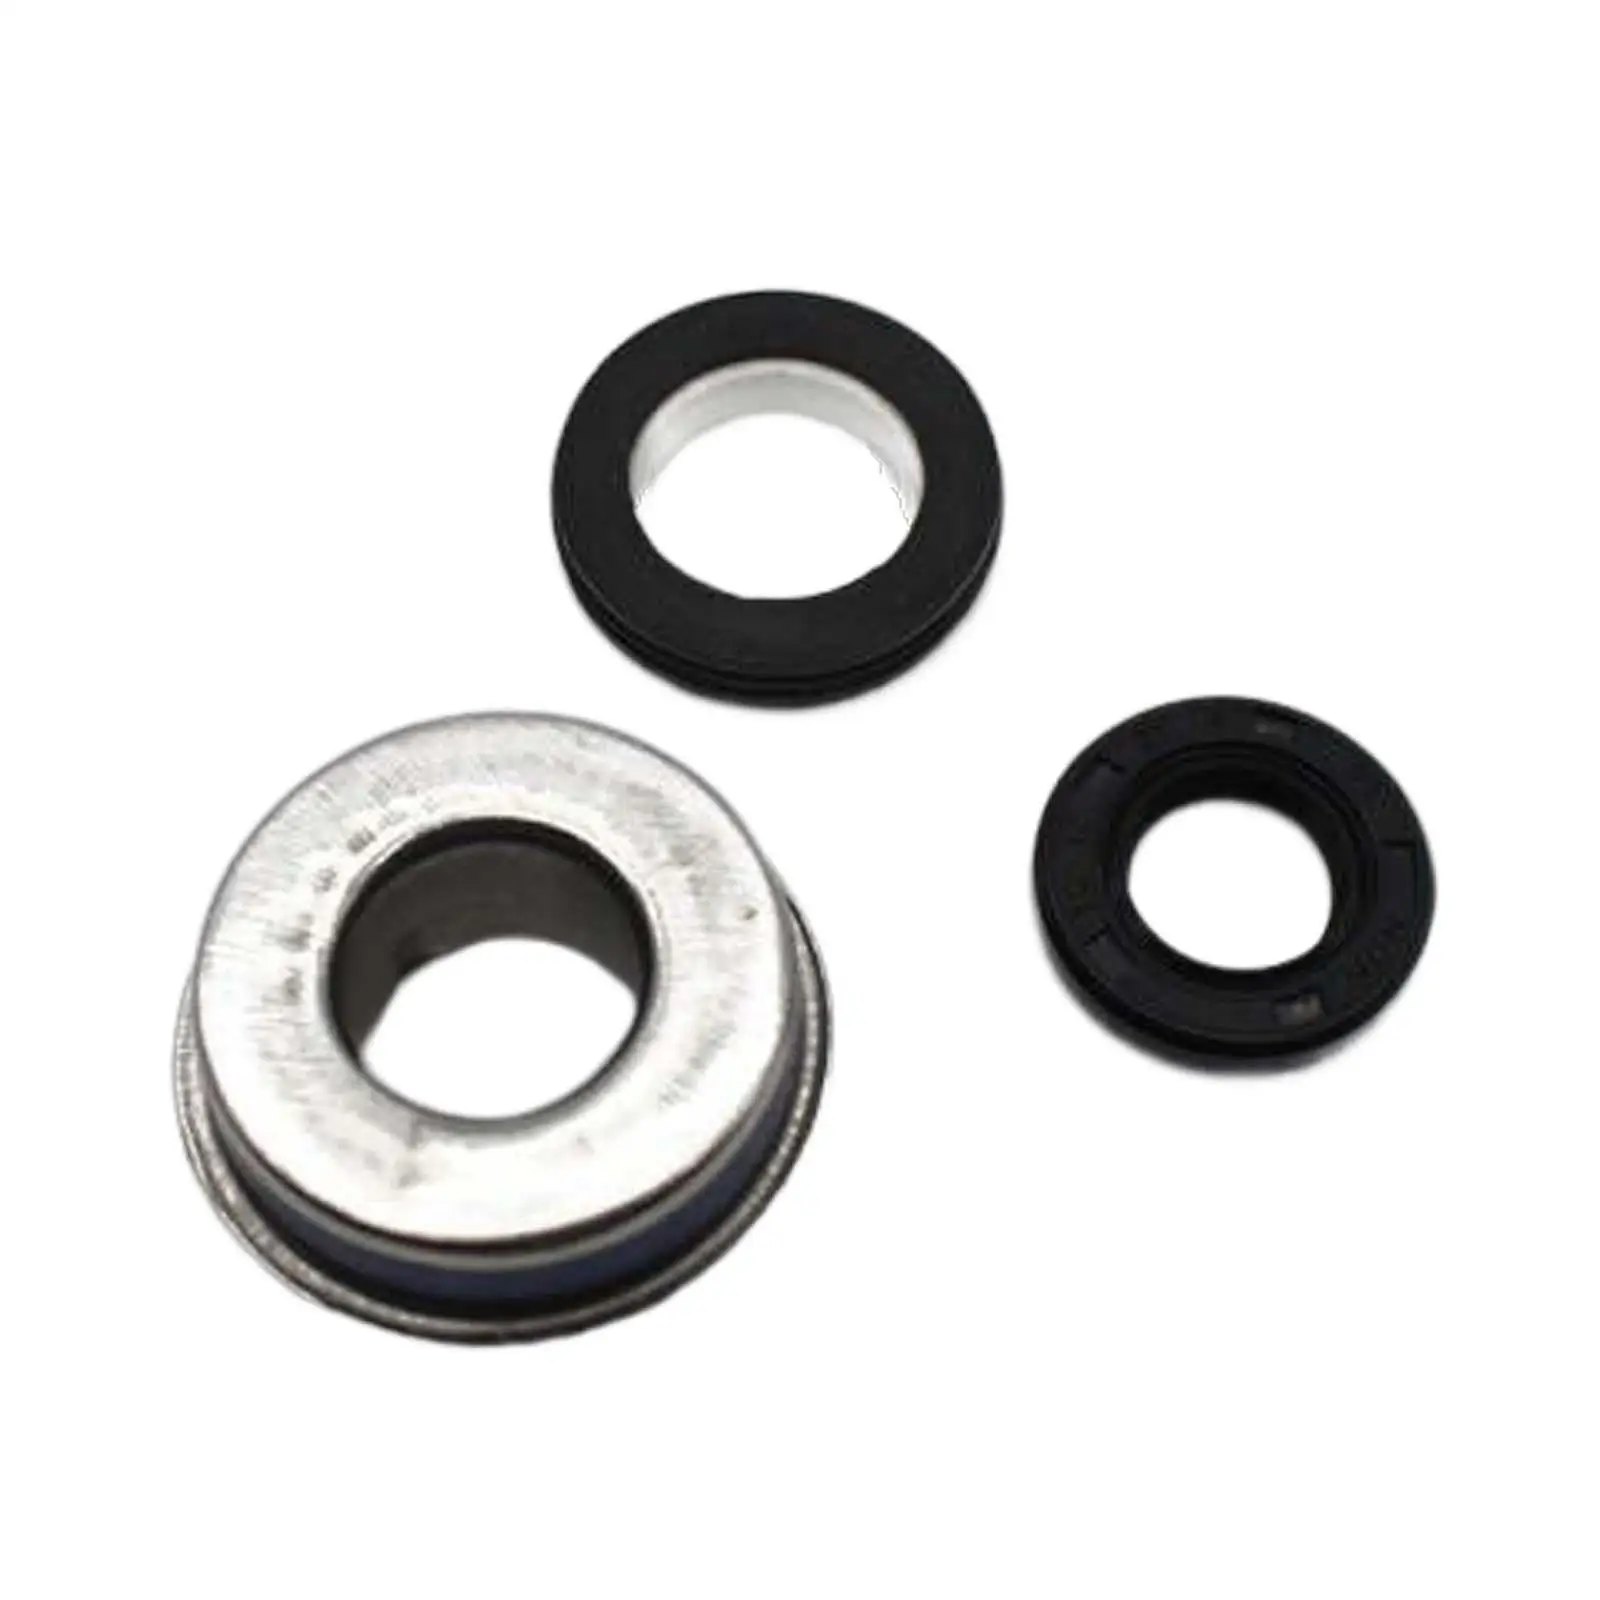 3x Water Pump Seals Aluminum Equipment Simple to Use Fits for Xvs1300A V 2007-2014 Xvs1300A Midnight 007-200116